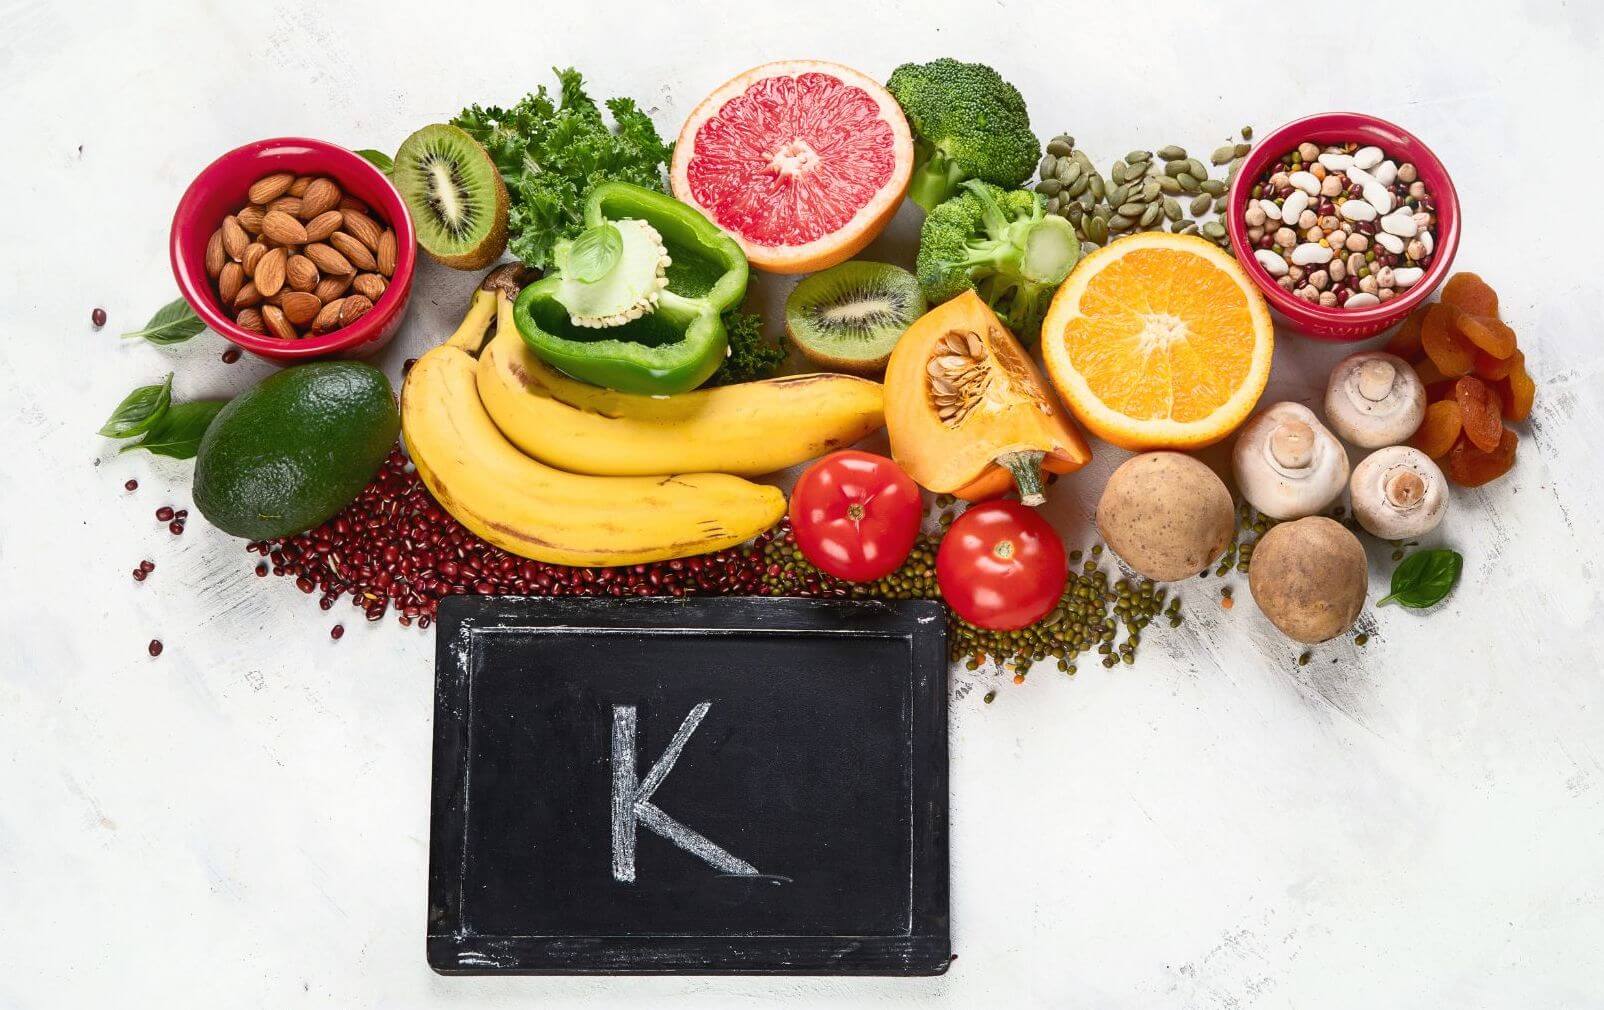 High potassium foods to illustrate content of our high potassium food list